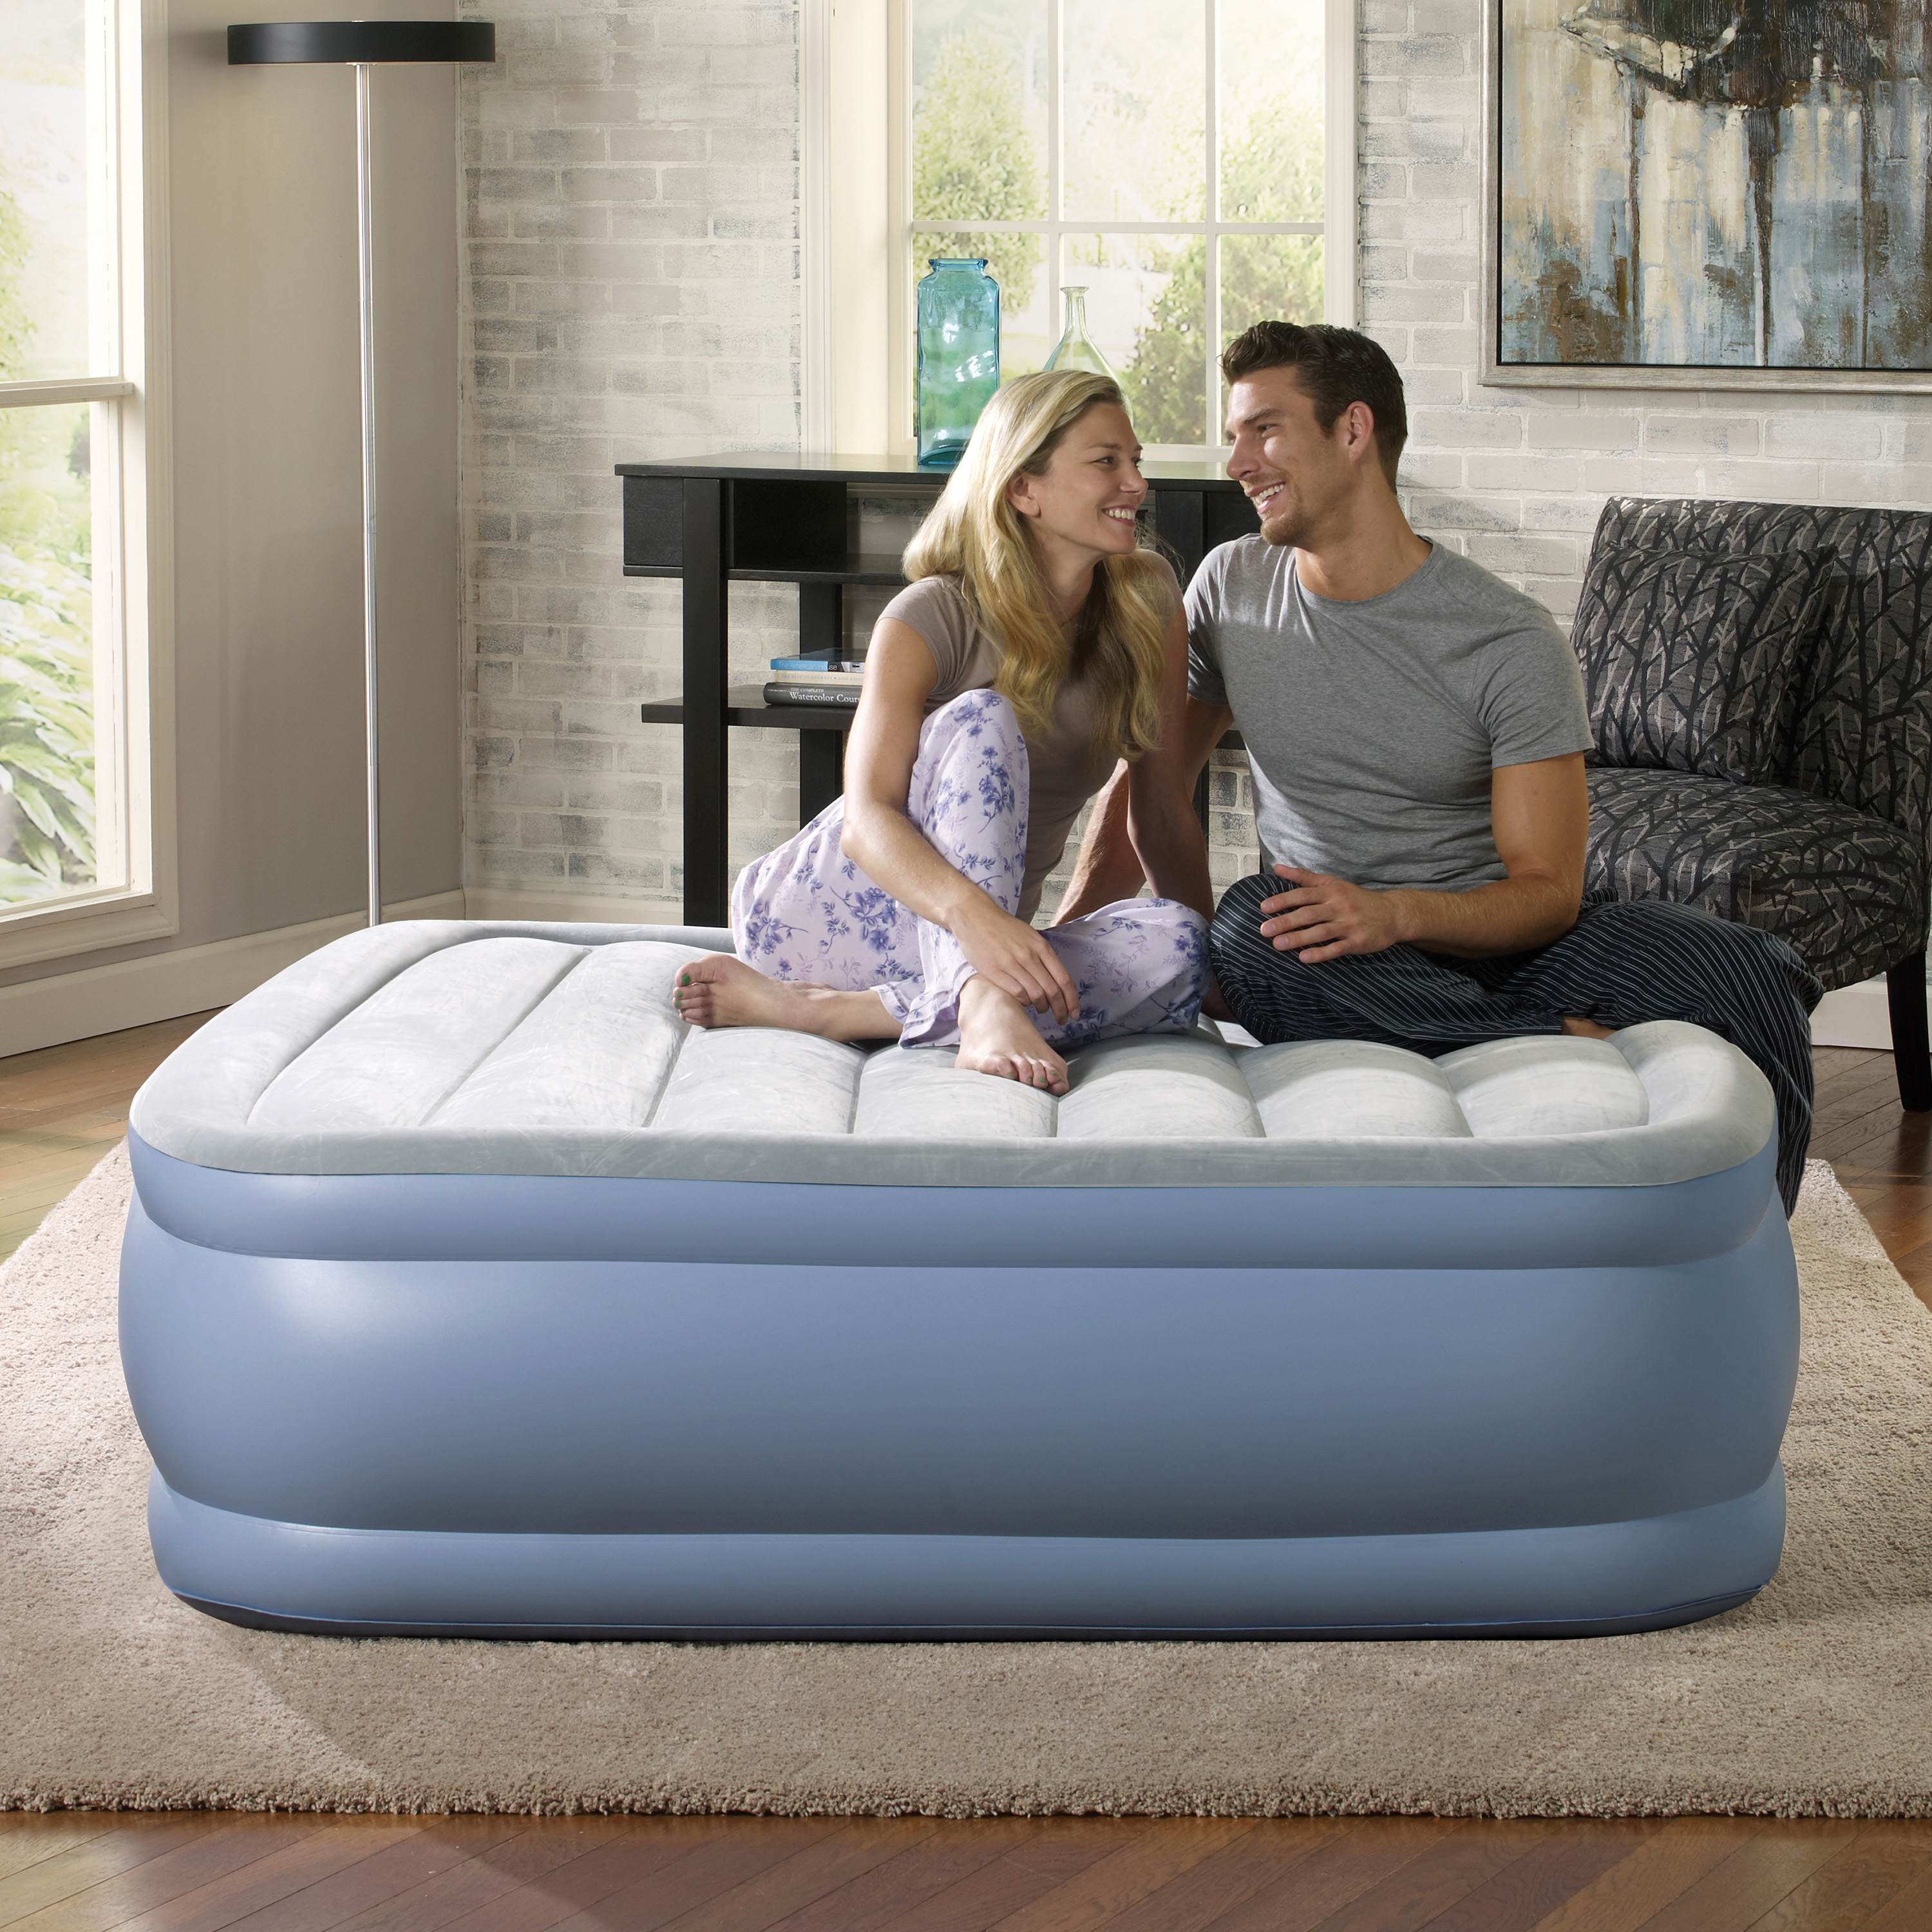 Beautyrest Hi Loft 17" Queen Air Bed Mattress, Raised Inflatable Blow-Up Bed, Powerful Pump, Adjustable Firmness - image 4 of 13